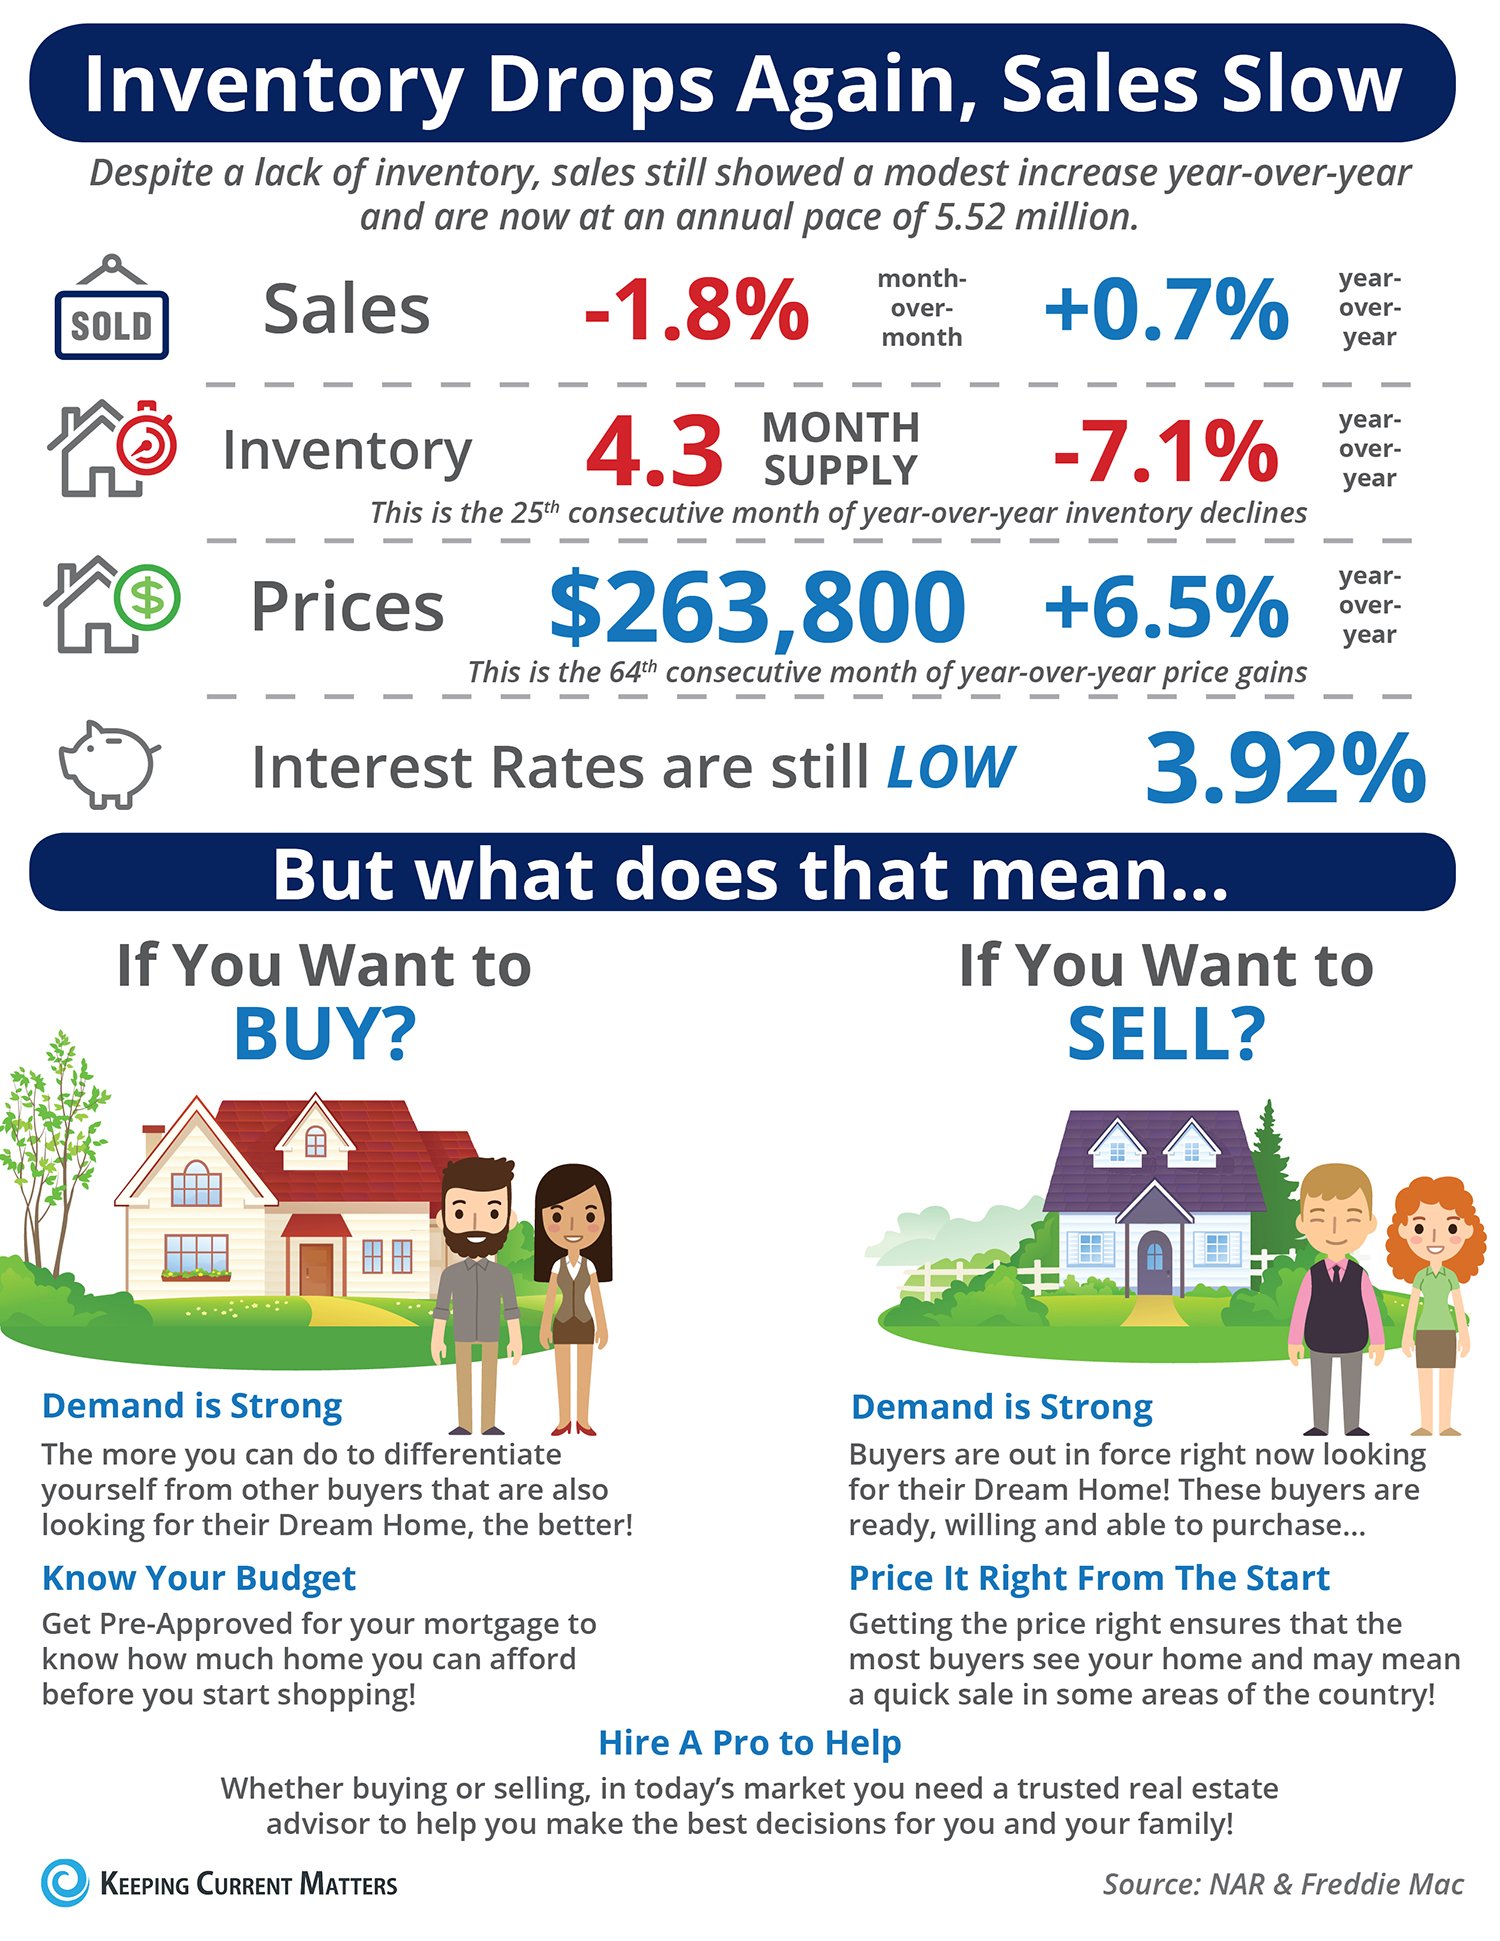 Inventory Drops Again, Sales Slow [INFOGRAPHIC] | Keeping Current Matters